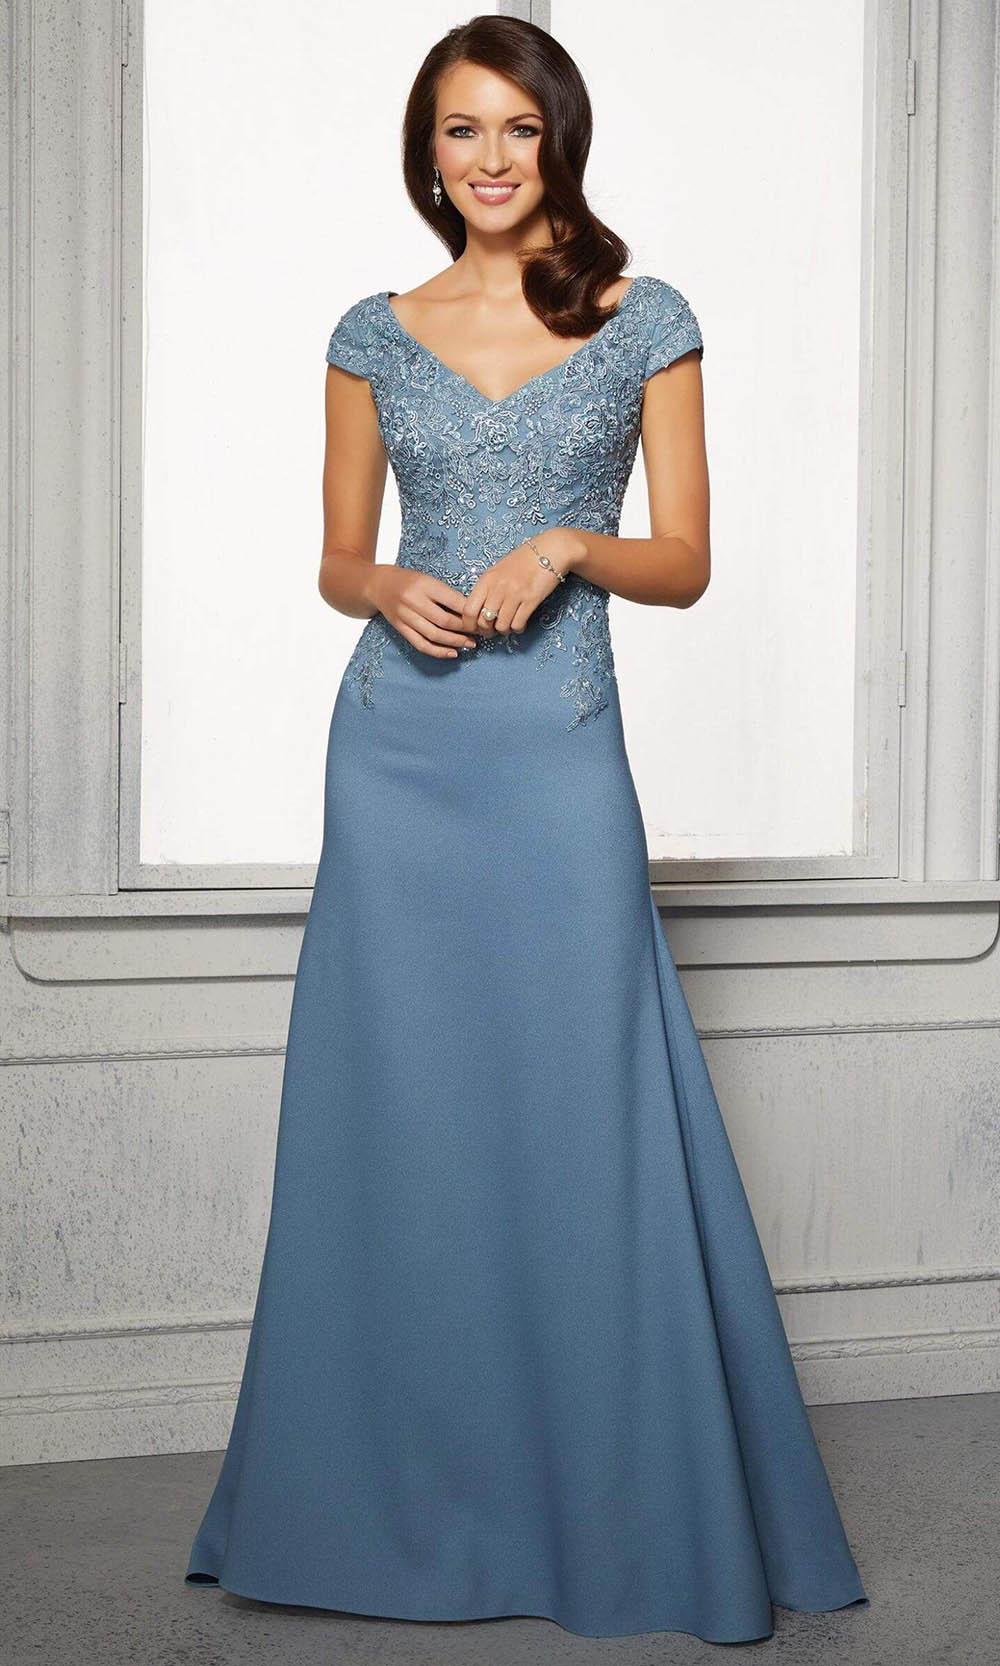 MGNY By Mori Lee - 72421 Cap Sleeves A-Line Evening Dress Mother of the Bride Dresses 00 / Slate